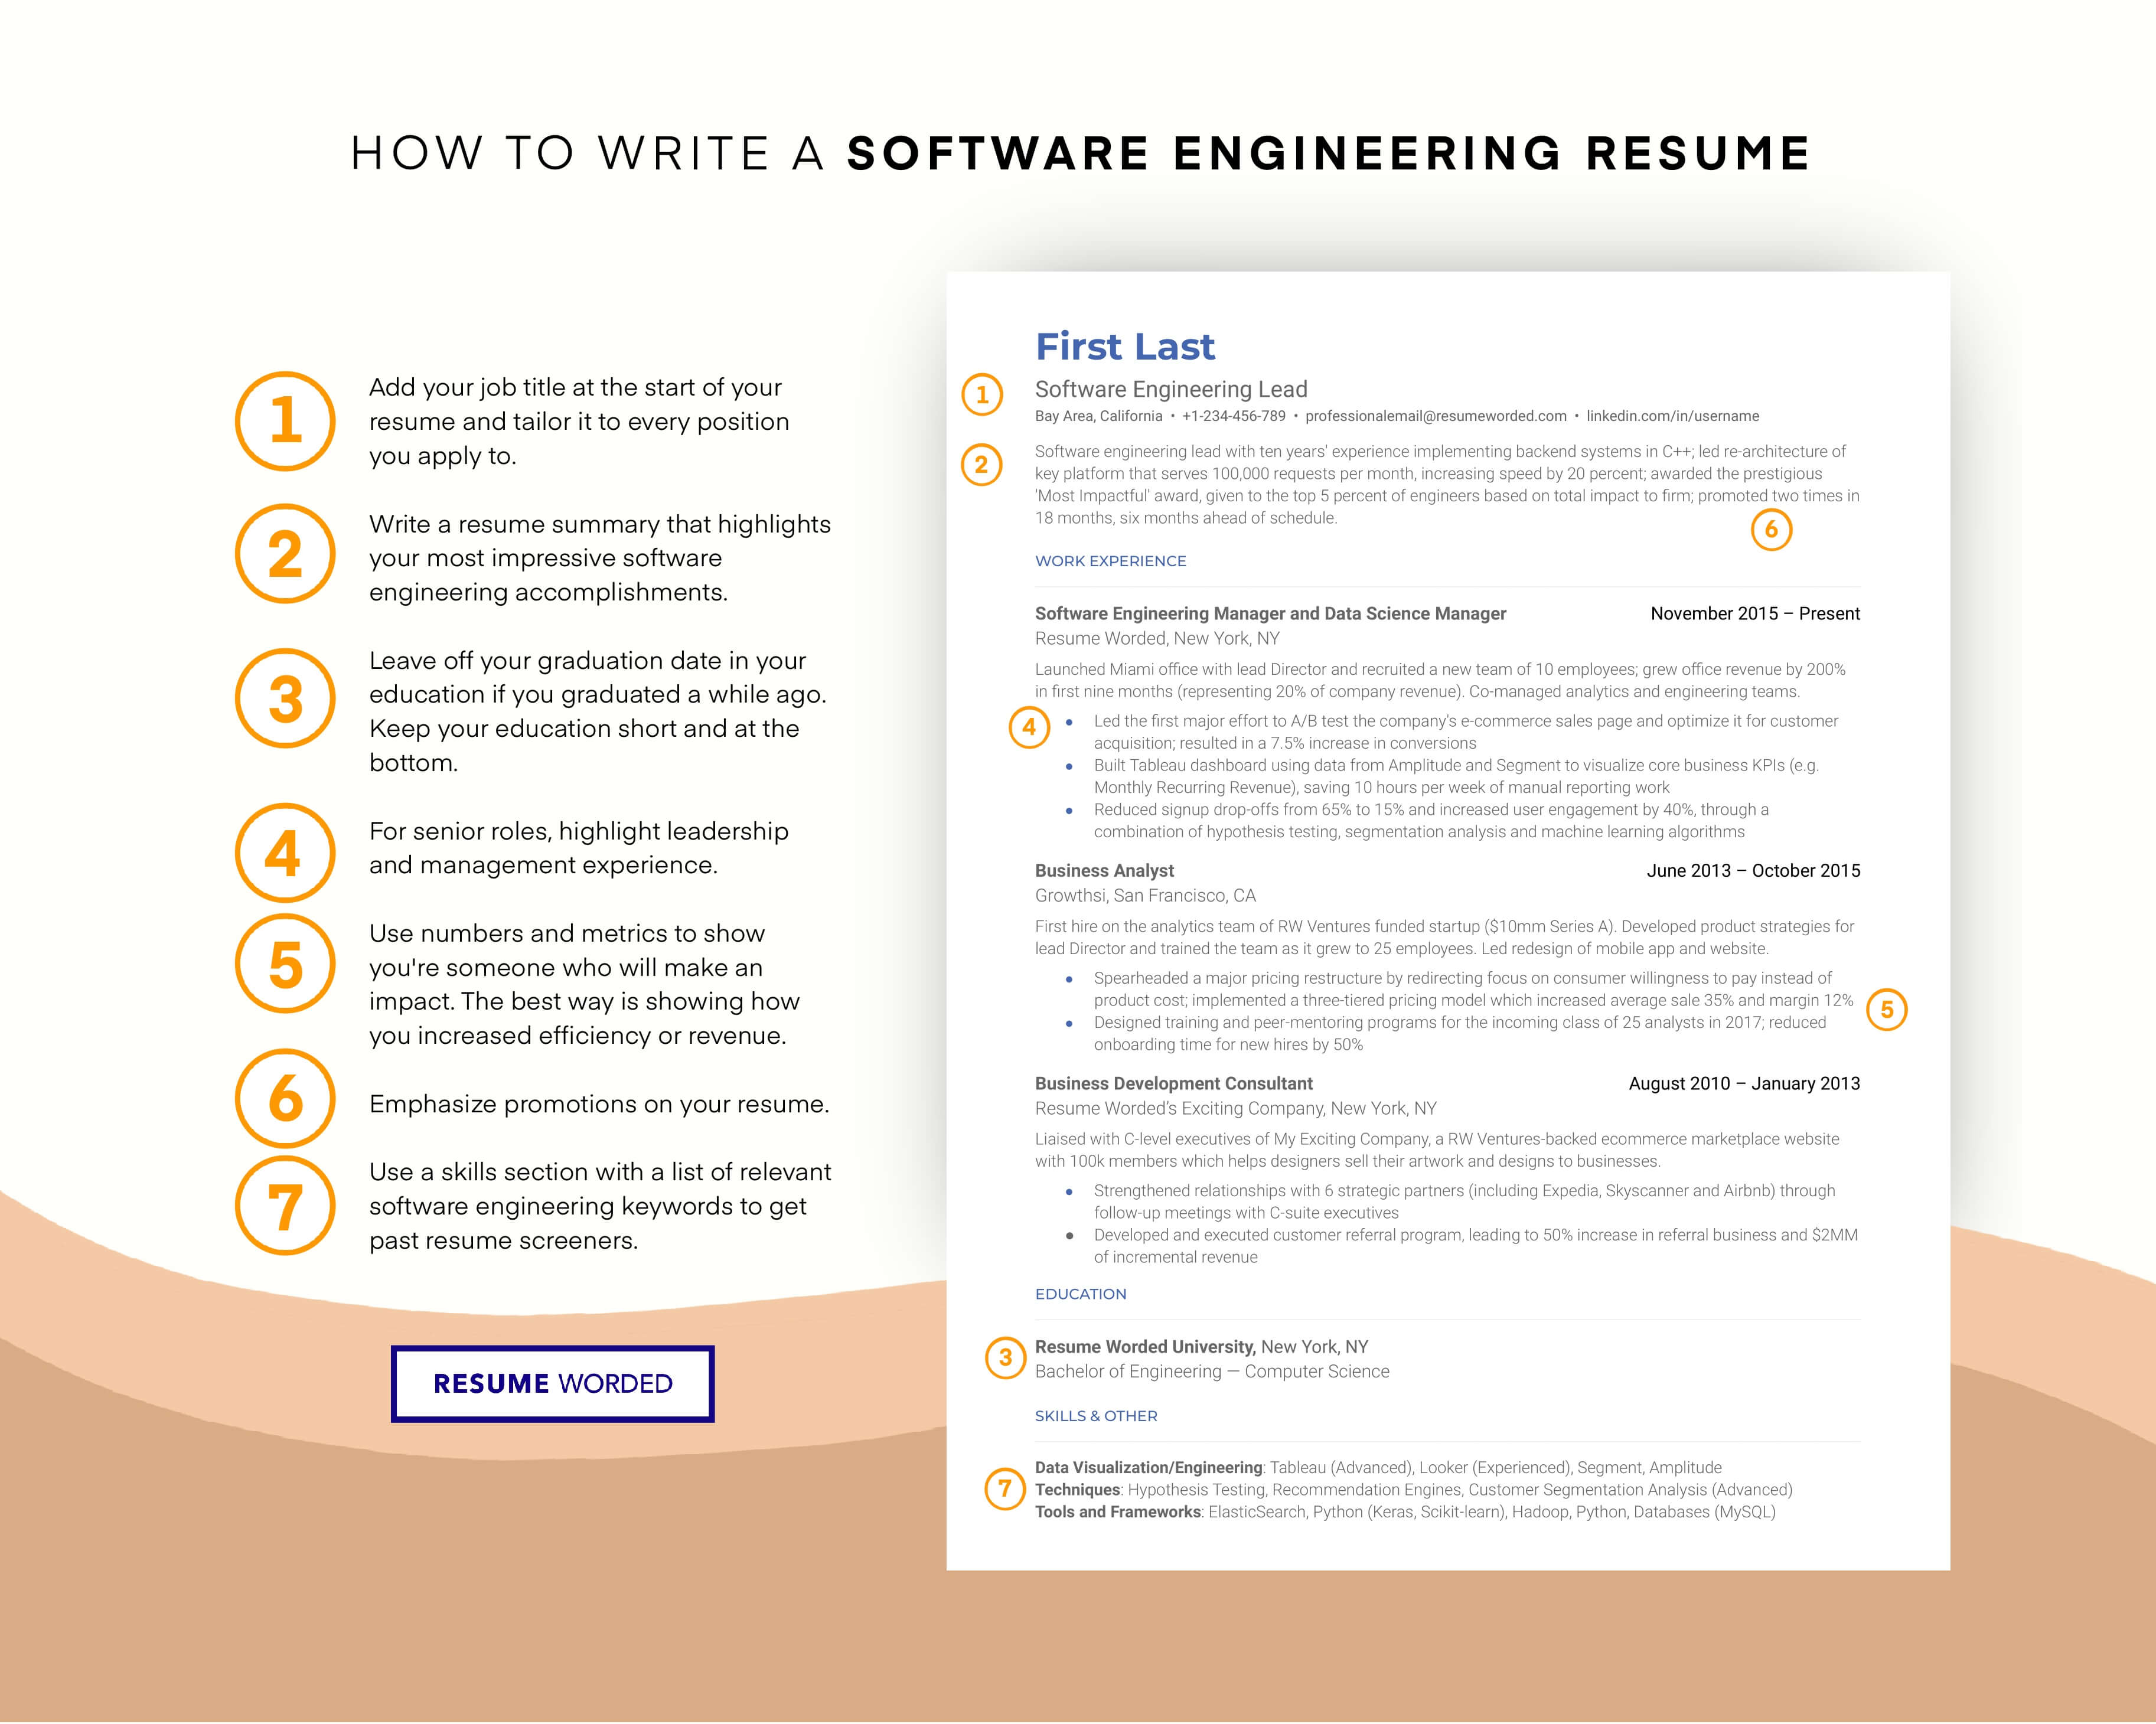 Include software skills and certifications - Architect / Architecture CV